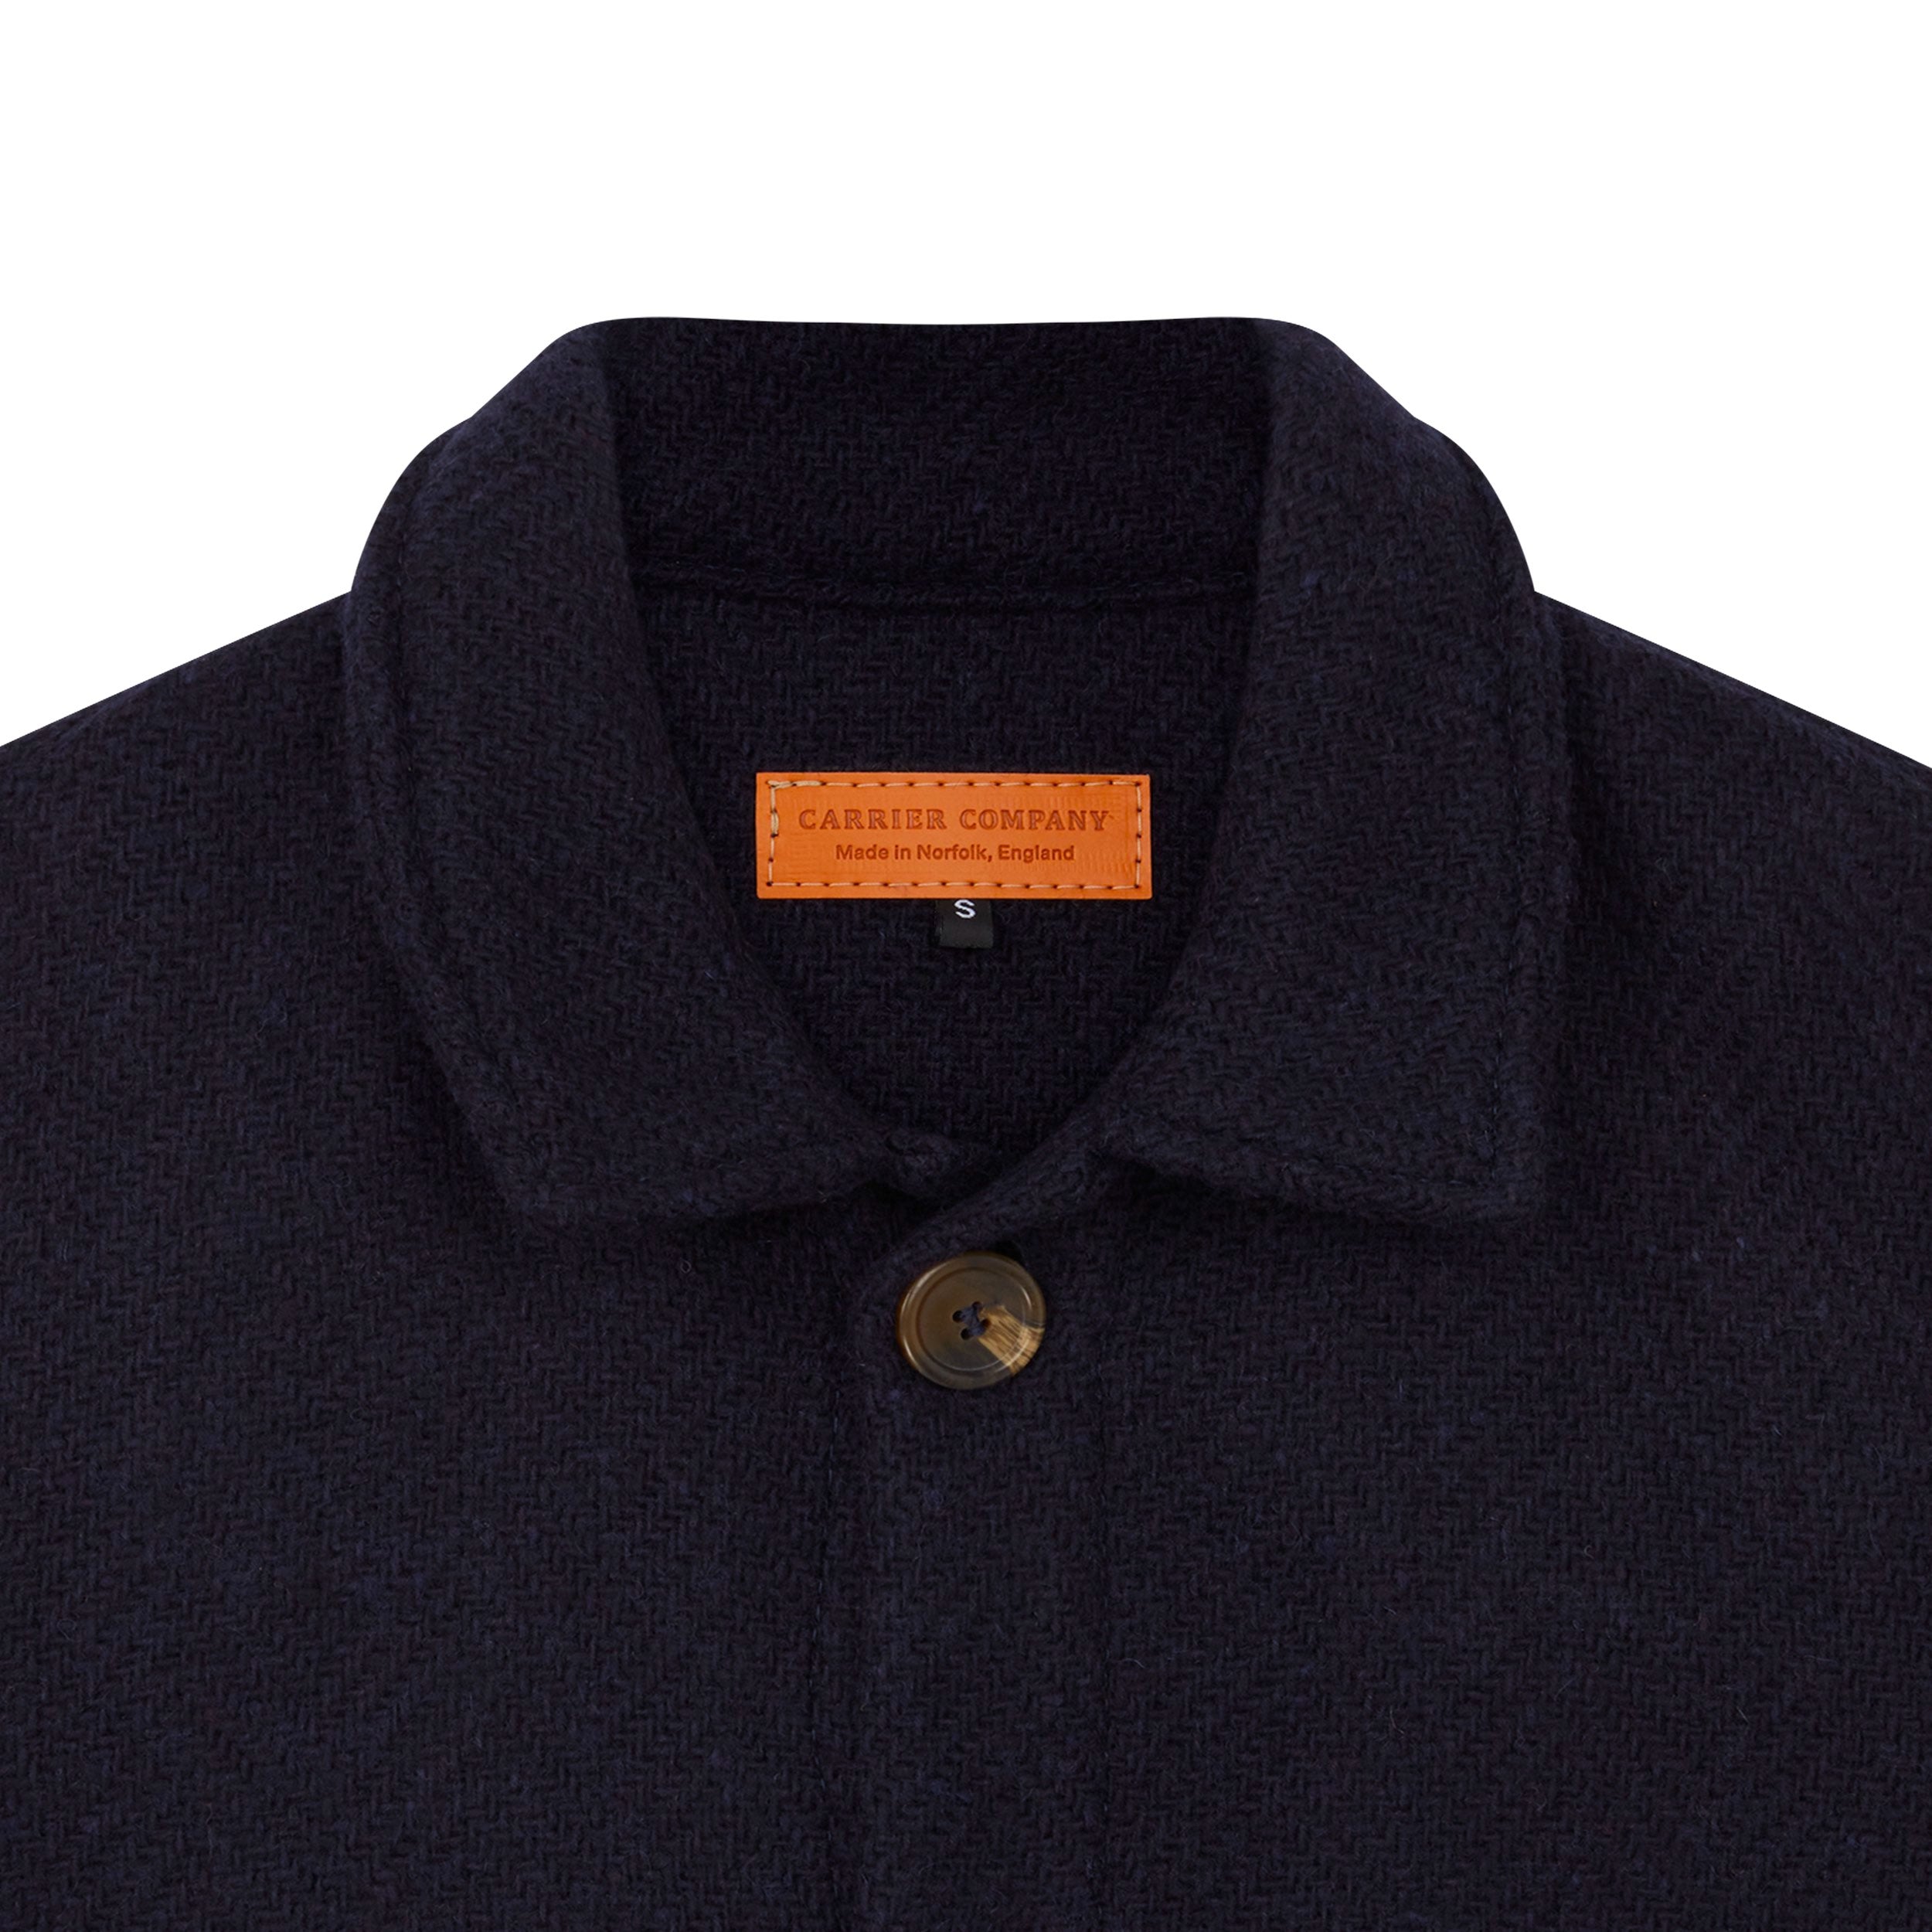 Carrier Company Celtic Wool Jacket in Navy